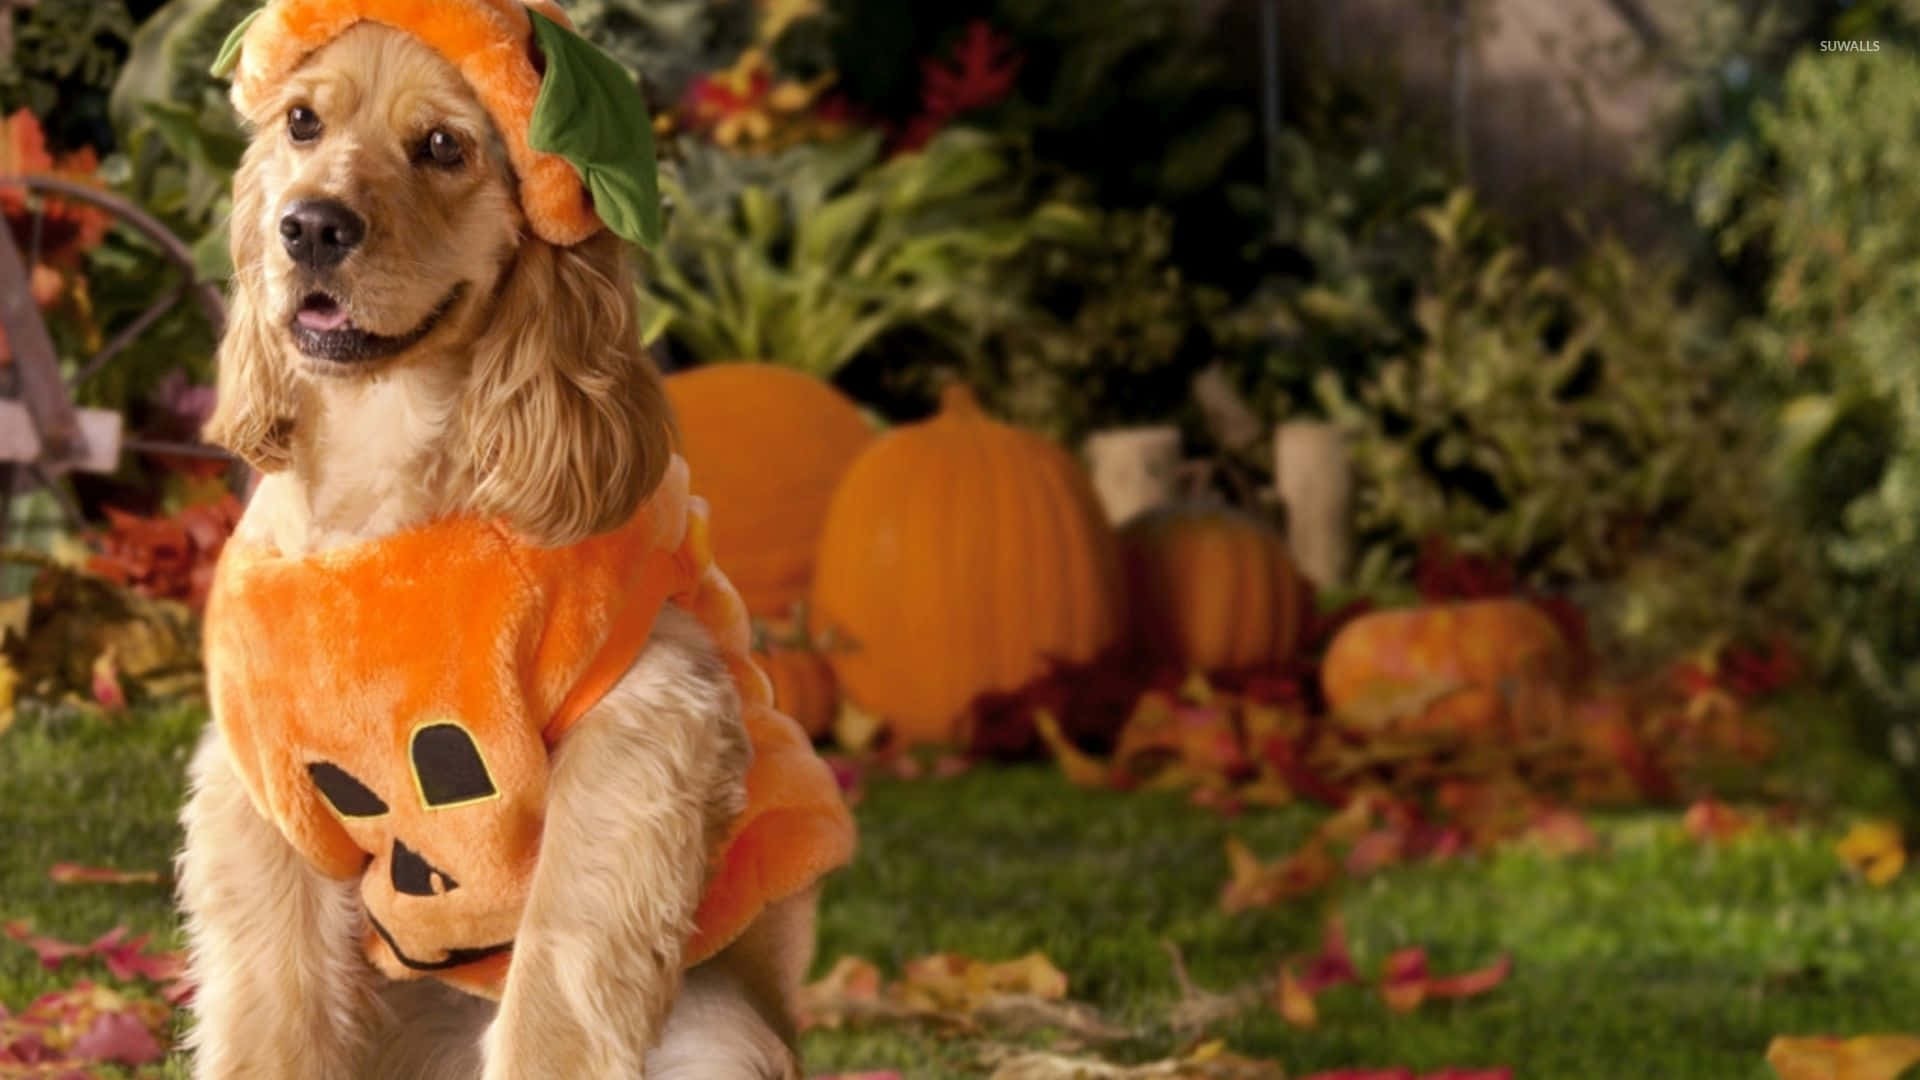 Get creative this Halloween with your pet and dress them up in unique costumes! Wallpaper